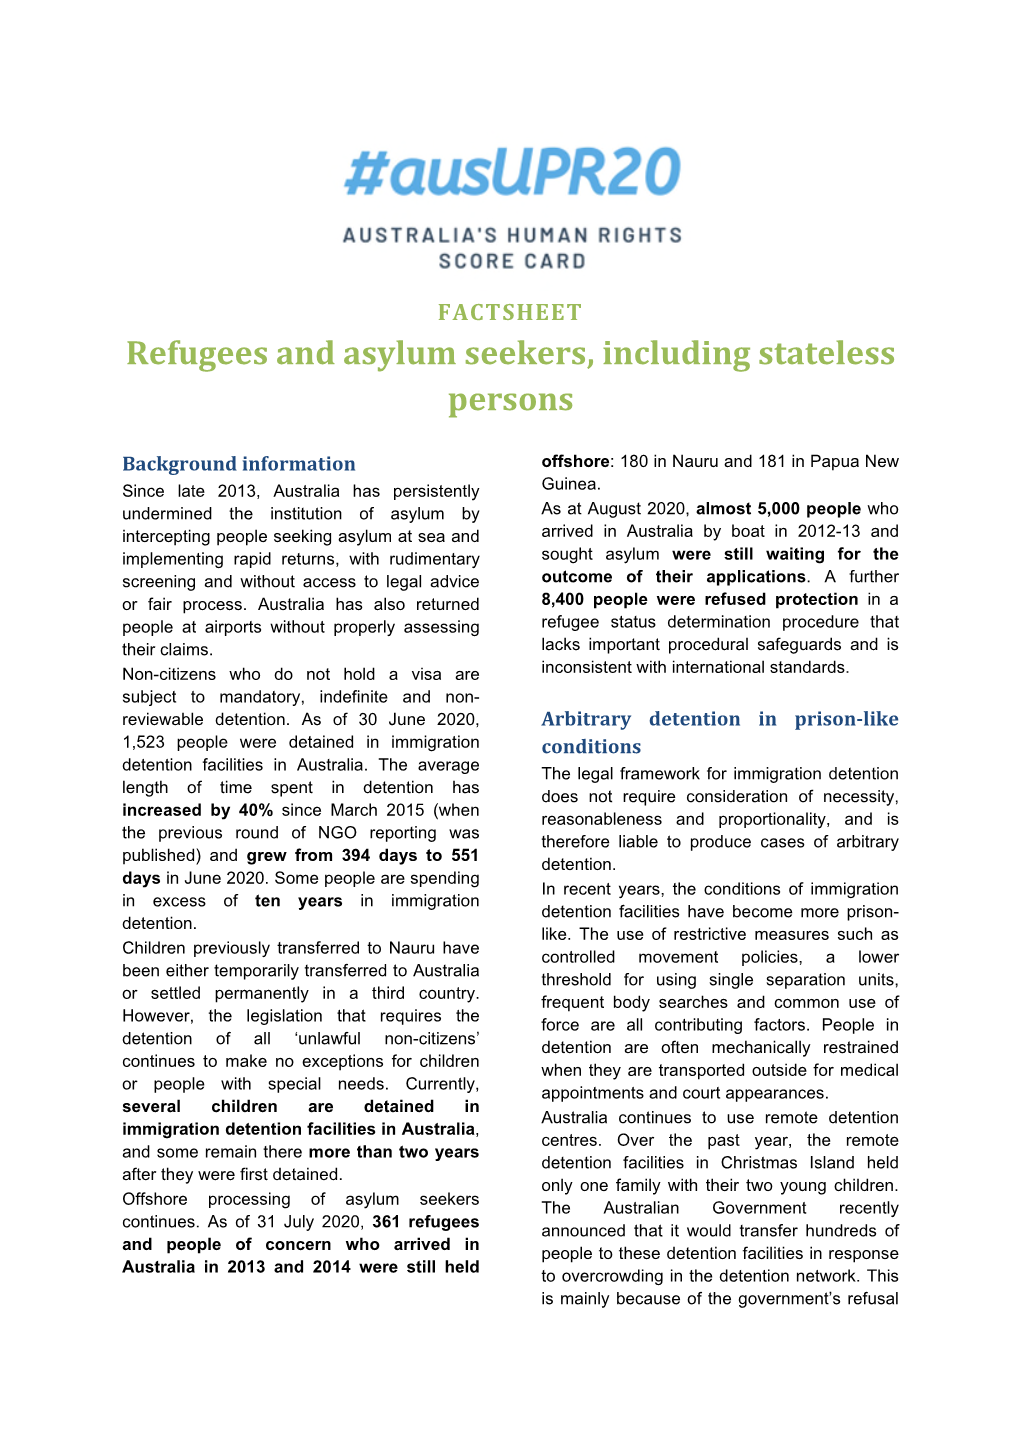 Refugees, Asylum Seekers and Statelessness